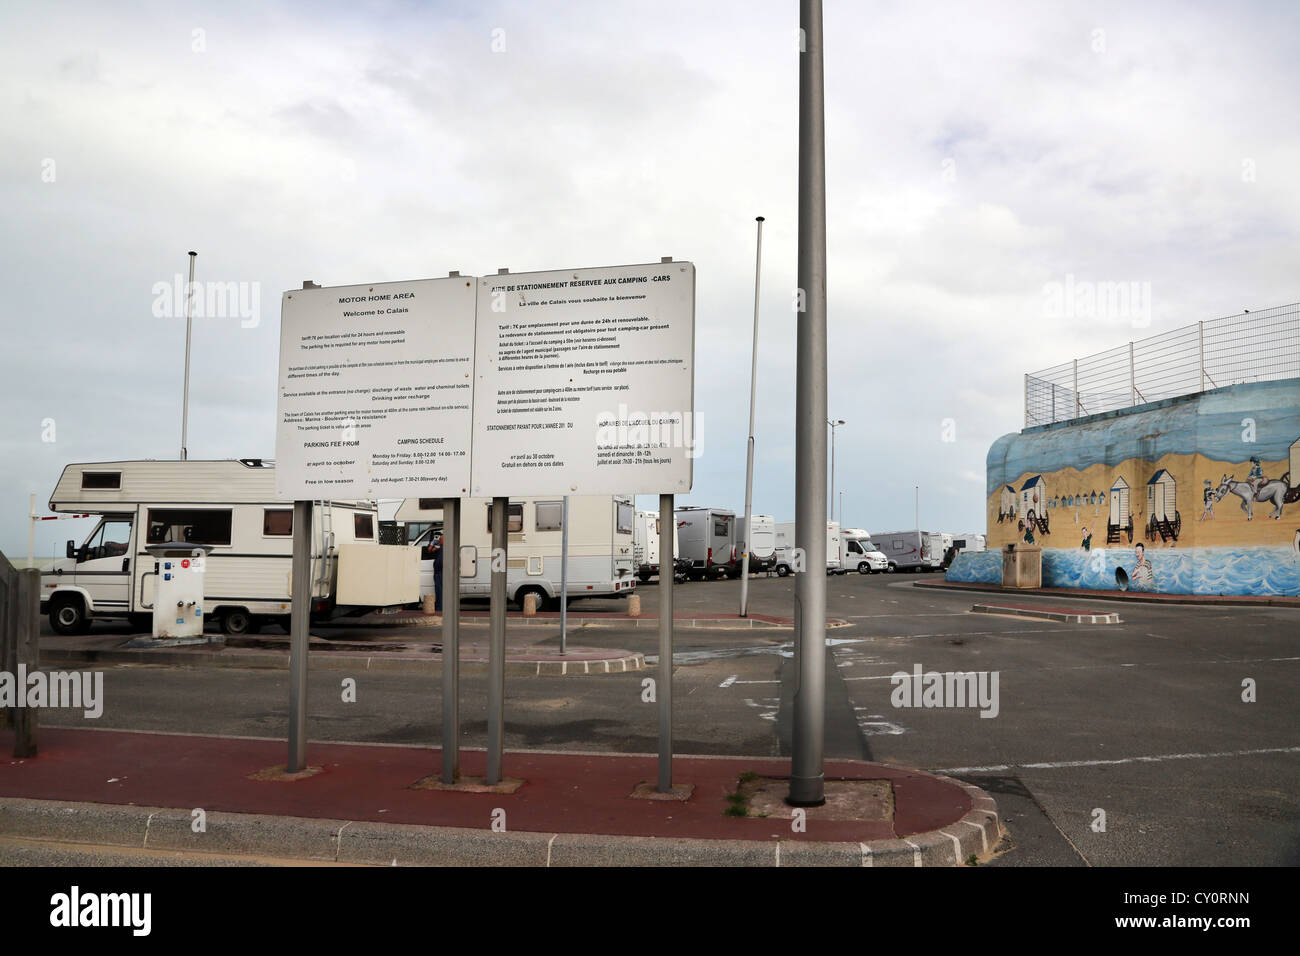 Calais France Caravans on the Seafront Motor Home Area Sign Stock Photo